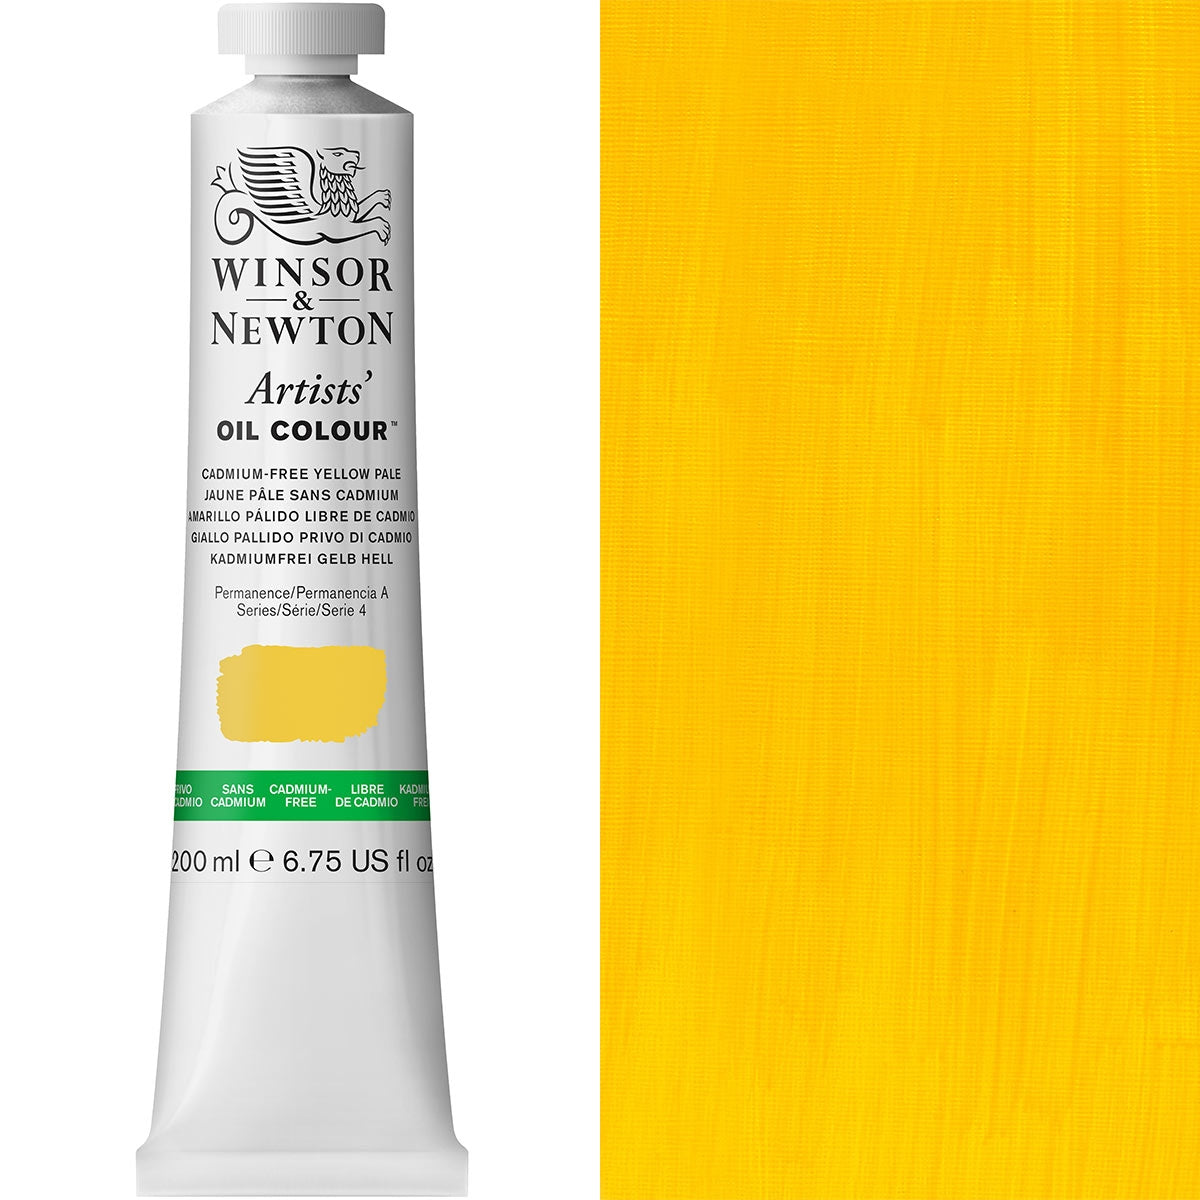 Winsor and Newton - Artists' Oil Colour - 200ml - Cad Free Yellow Pale